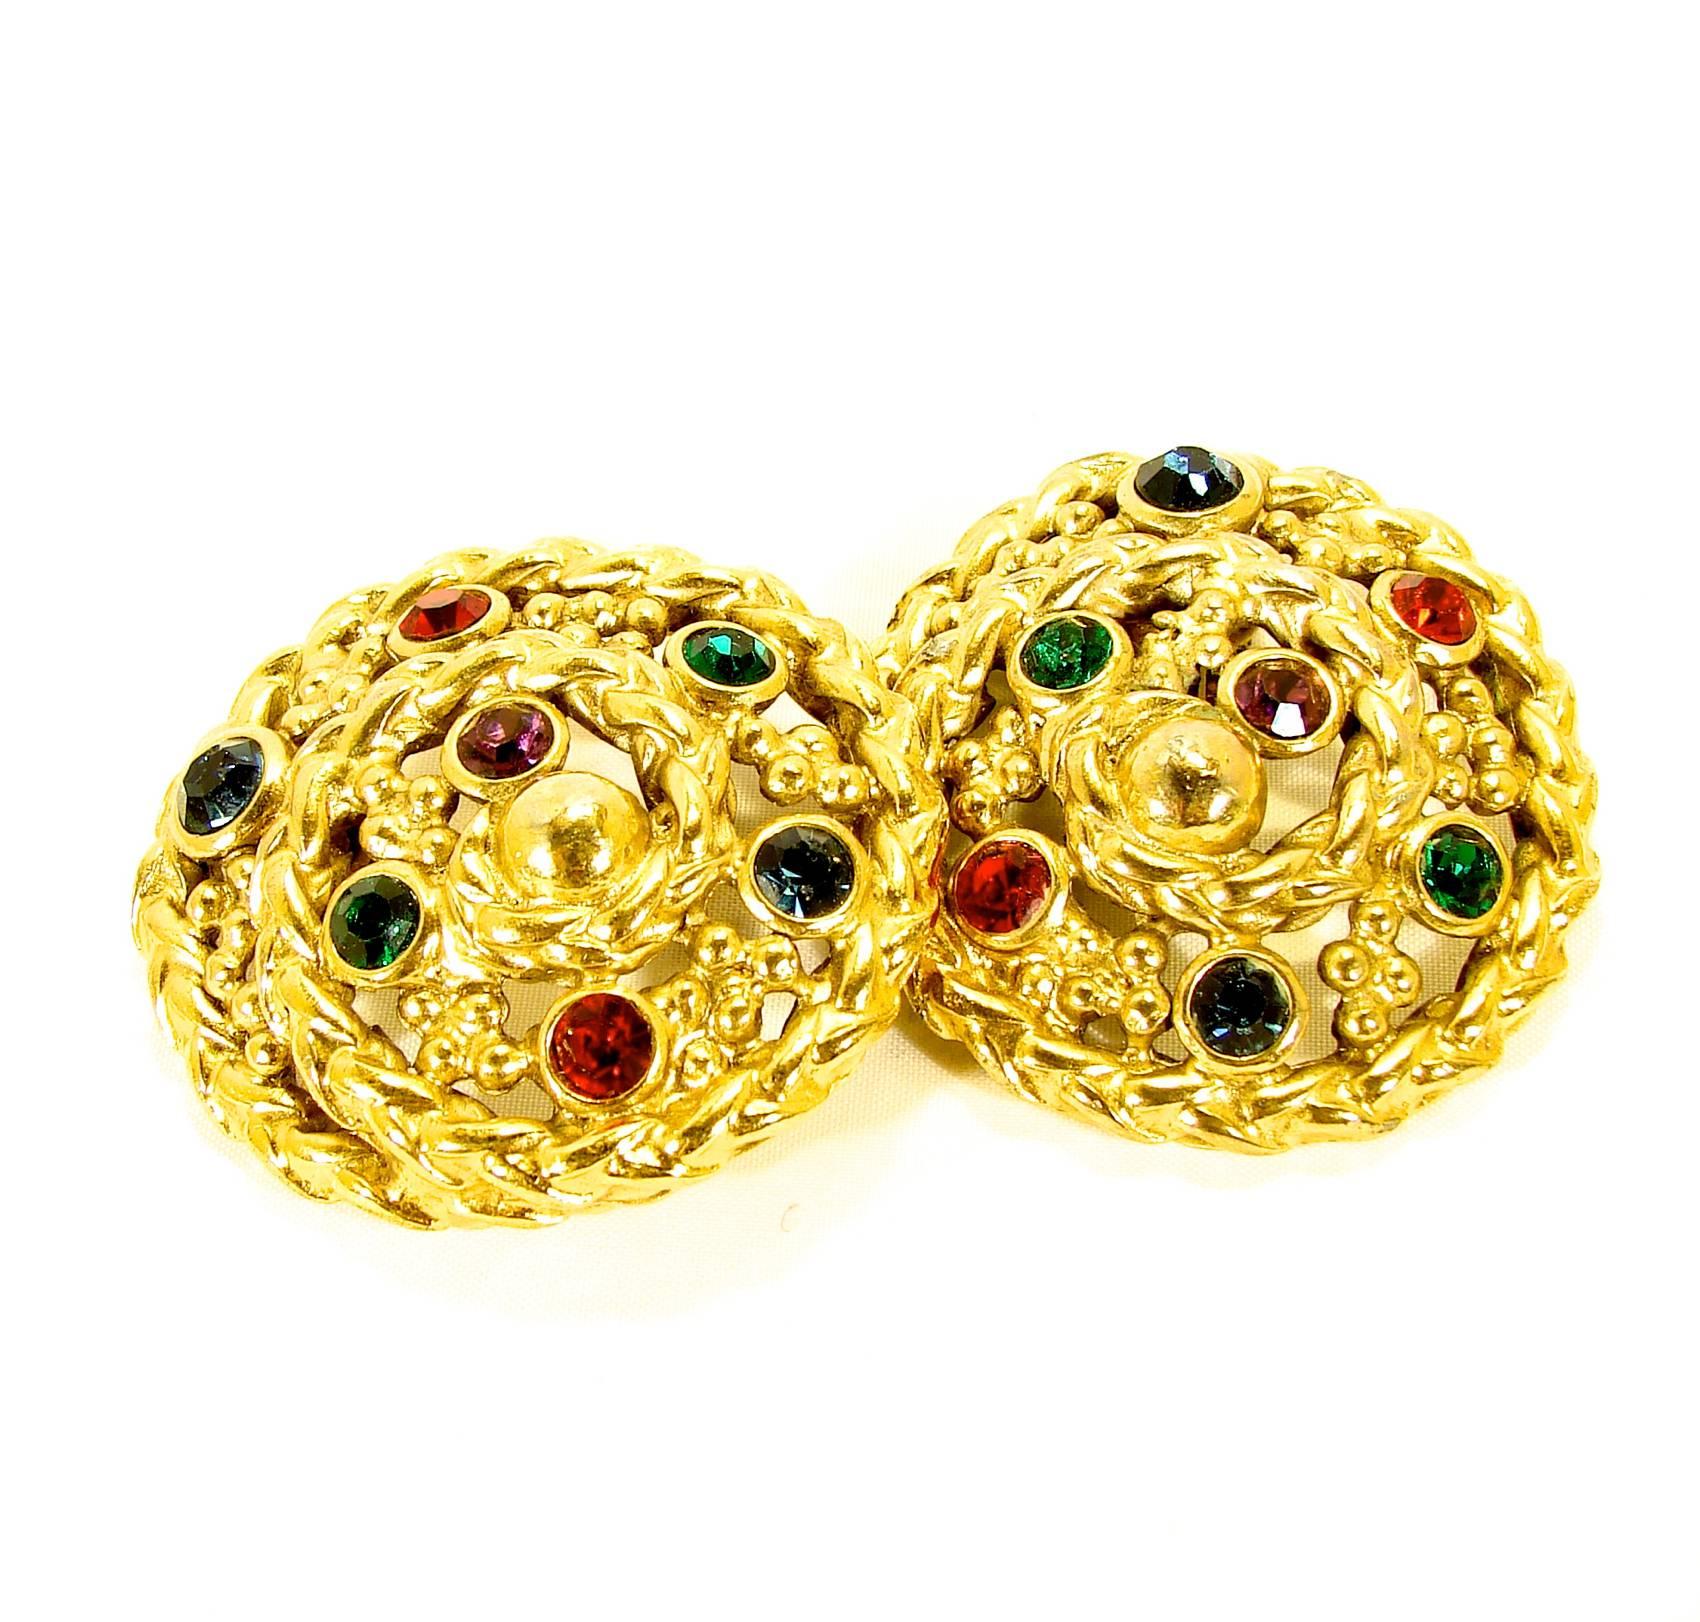 Delightful clip-style earrings were designed by Robert Goossens for Yves Saint Laurent circa the early 1970s.  These clip-style earrings feature small round glass cabs in shades of ruby, sapphire and emerald set in a gold rope setting. In excellent